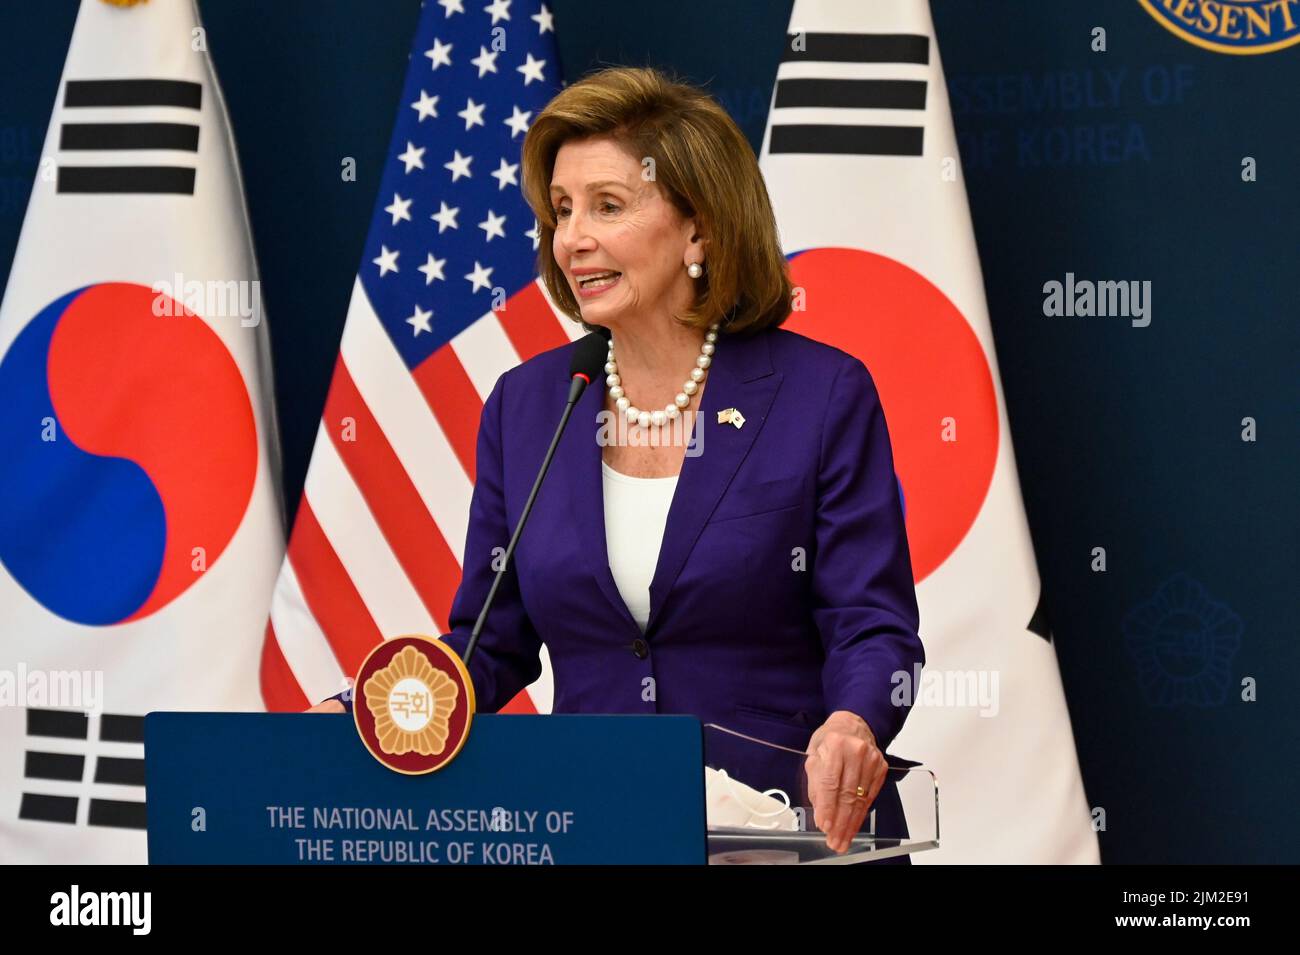 Seoul, South Korea. 04th Aug, 2022. U.S. Speaker of the House Nancy Pelosi speaks at a press conference at the National Assembly in Seoul, South Korea on Thursday, August 4, 2022. Speaker Pelosi visited South Korea after a trip to Taiwan that sparked a furious response from China. Photo by Thomas Maresca/UPI Credit: UPI/Alamy Live News Stock Photo